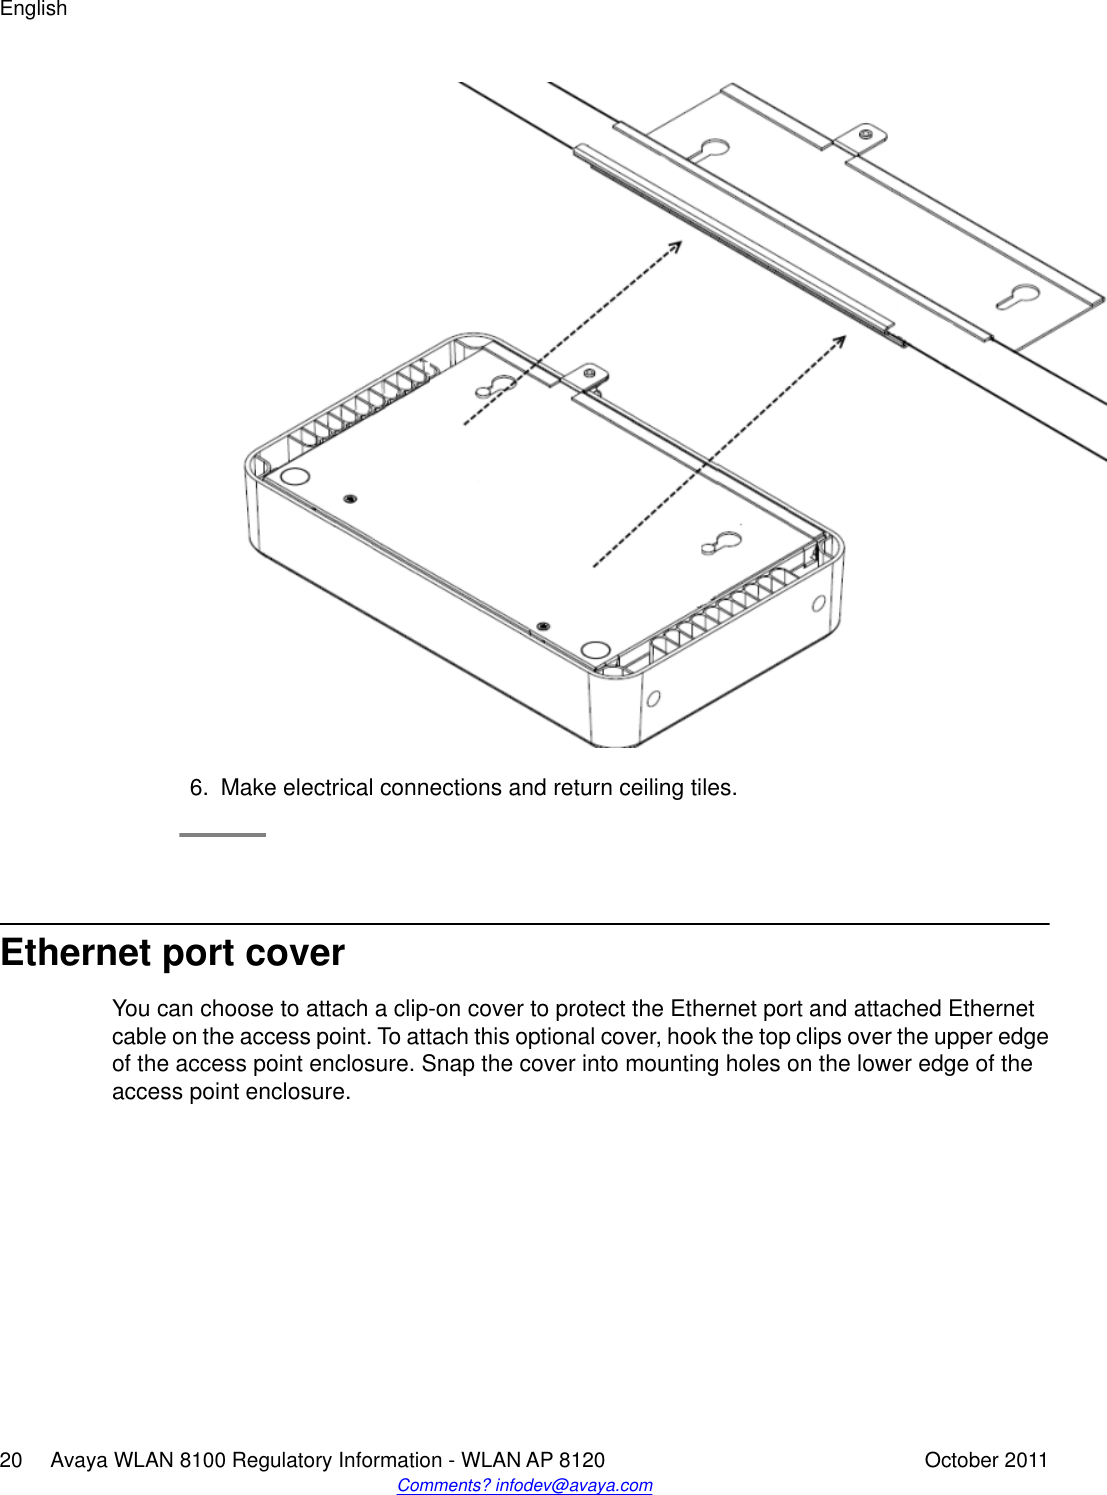 6. Make electrical connections and return ceiling tiles.Ethernet port coverYou can choose to attach a clip-on cover to protect the Ethernet port and attached Ethernetcable on the access point. To attach this optional cover, hook the top clips over the upper edgeof the access point enclosure. Snap the cover into mounting holes on the lower edge of theaccess point enclosure.English20     Avaya WLAN 8100 Regulatory Information - WLAN AP 8120 October 2011Comments? infodev@avaya.com